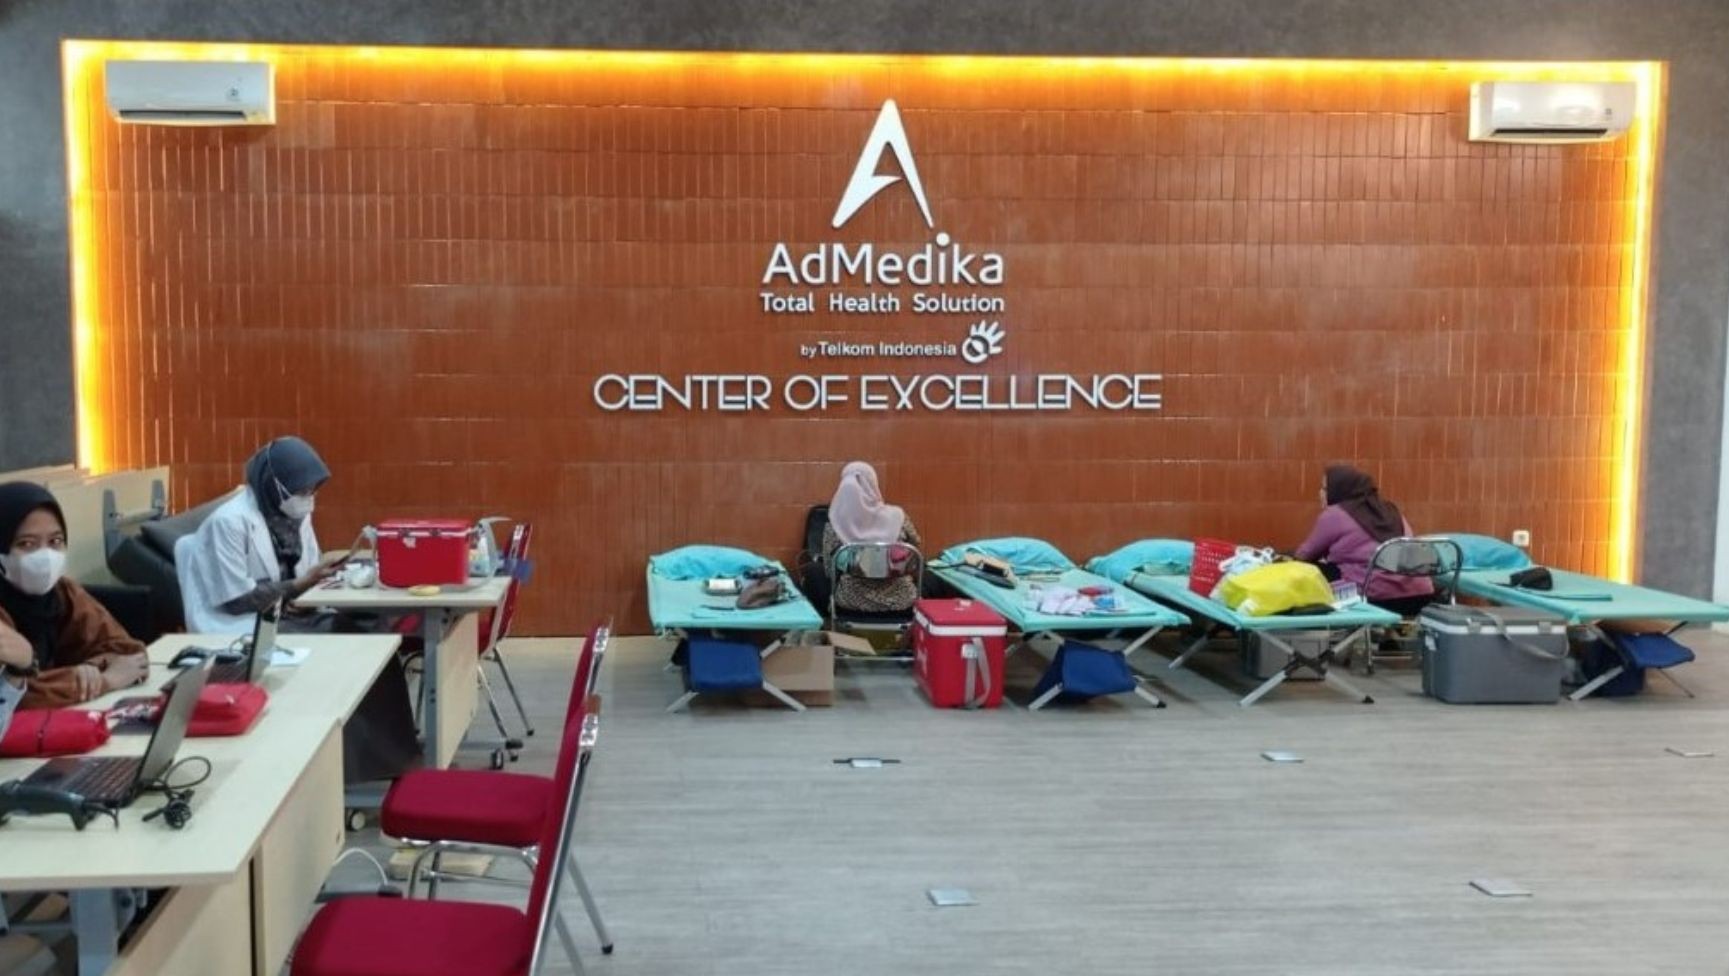 AdMedika Smart Operation (ASO) Solo Holds Another Blood Donation Event